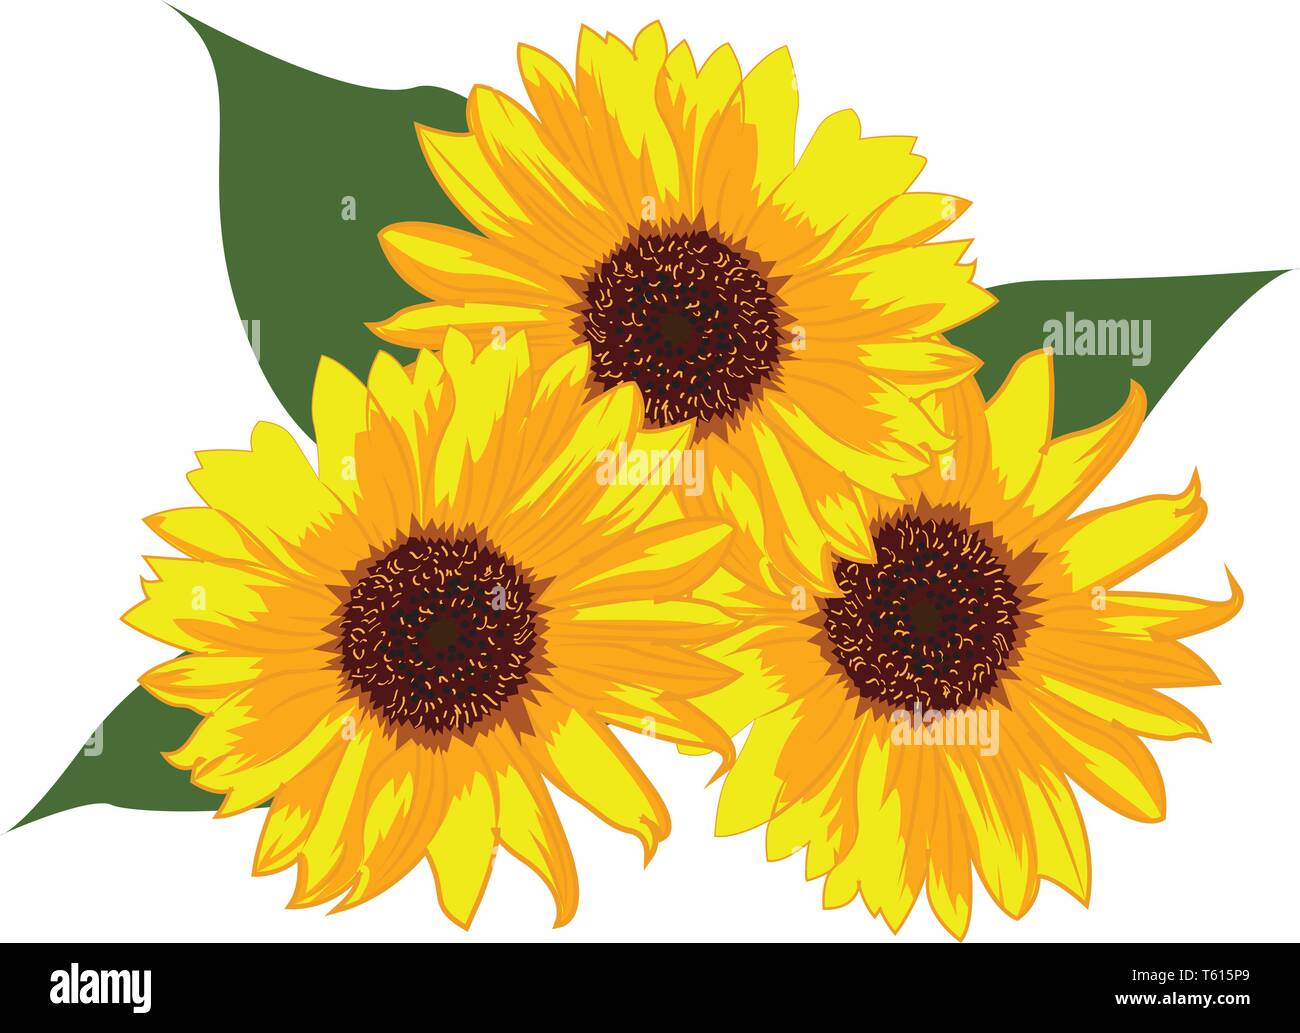 Sunflowers vector illustration on a white background isolated Stock Vector